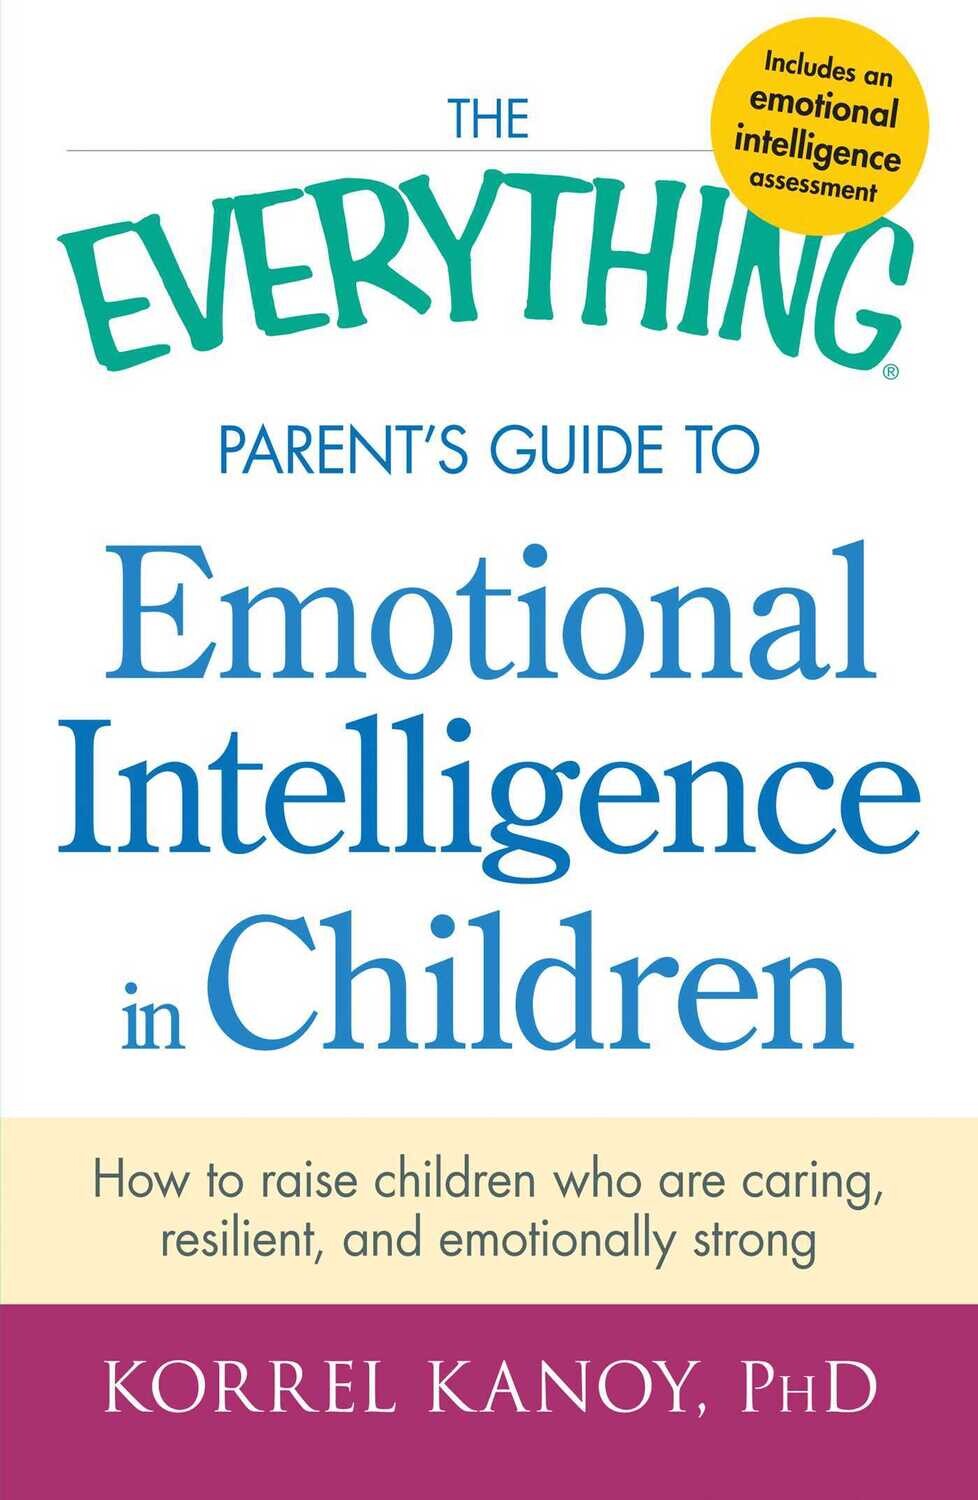 The everything parent's guide to emotional intelligence in children* (Kanoy)